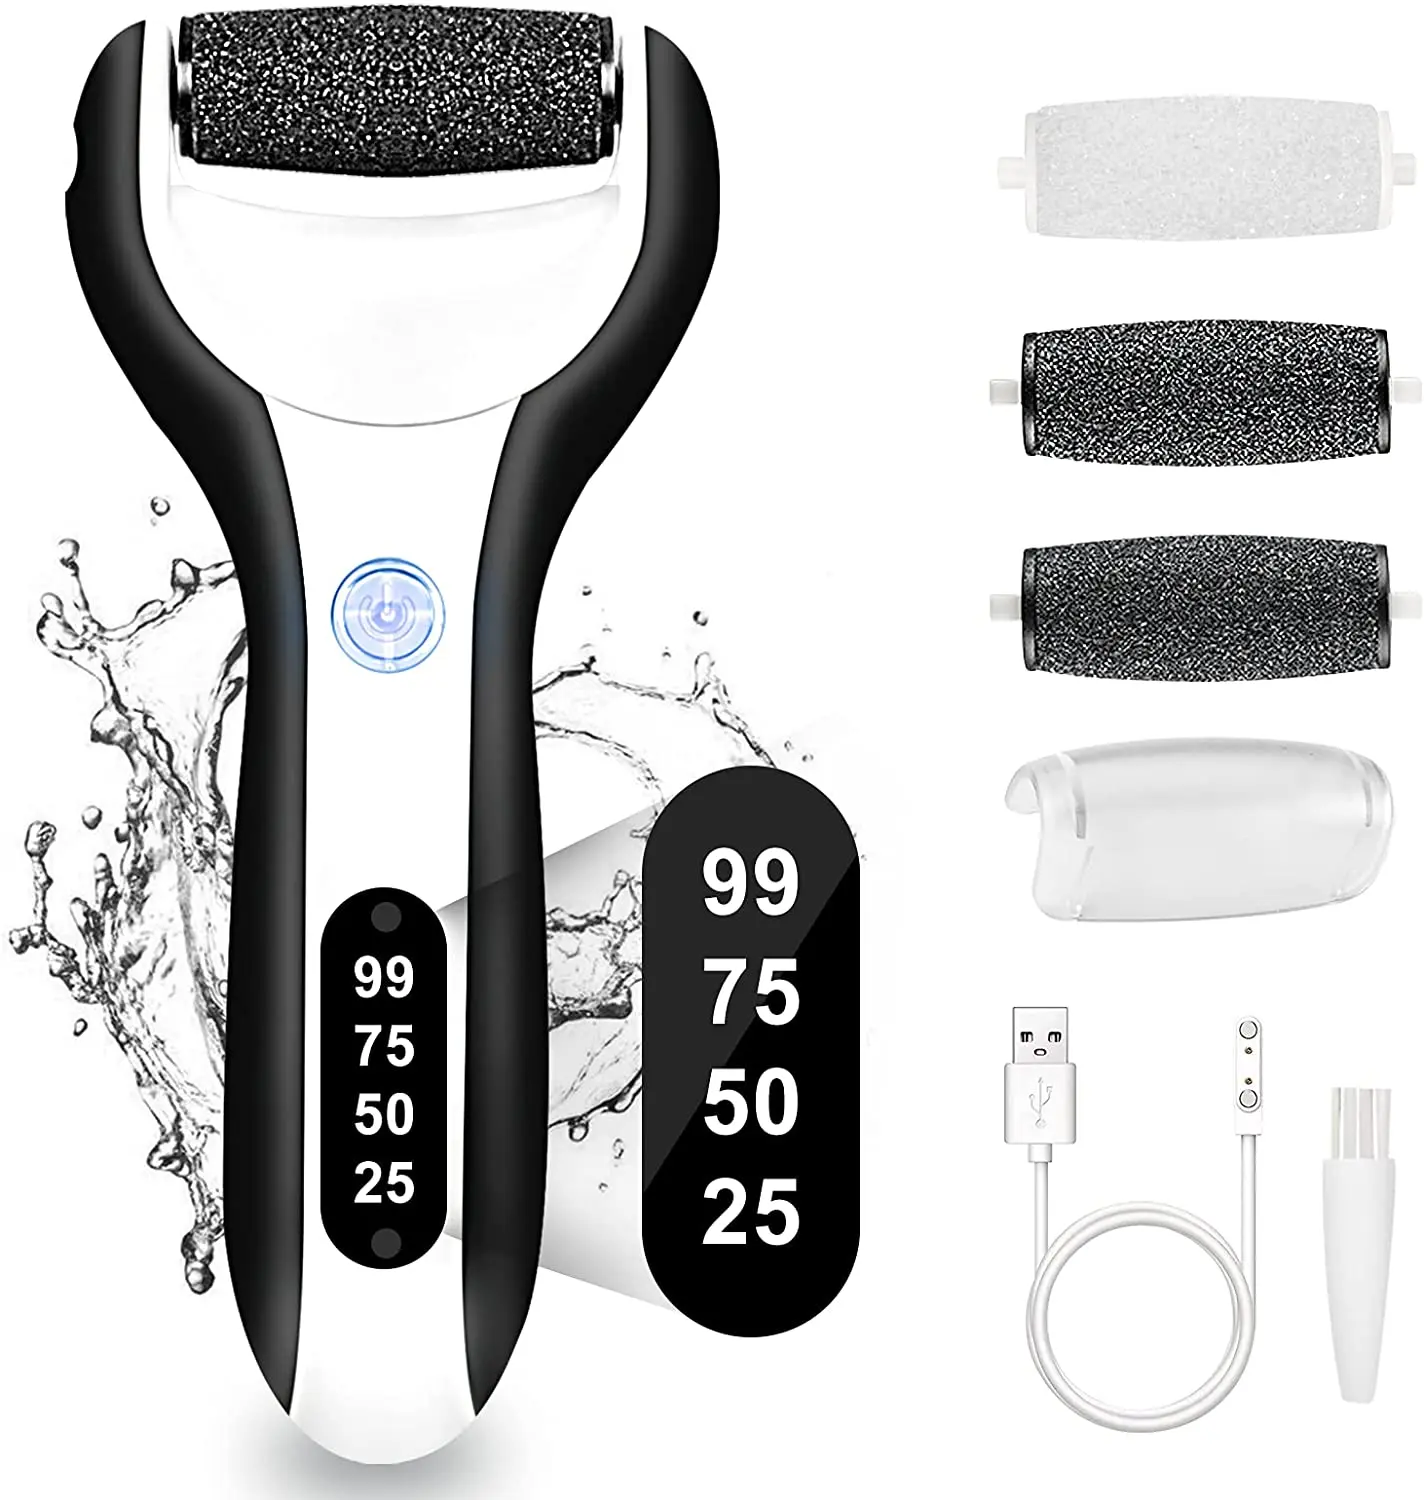 Rechargeable Electric Foot File Callus Remover Machine Pedicure Device Foot Care Tools Feet For Heels Remove Dead Skin black electric pedicure tools foot care file leg heels remove hard cracked dead skin callus remover lcd feet clean care machine